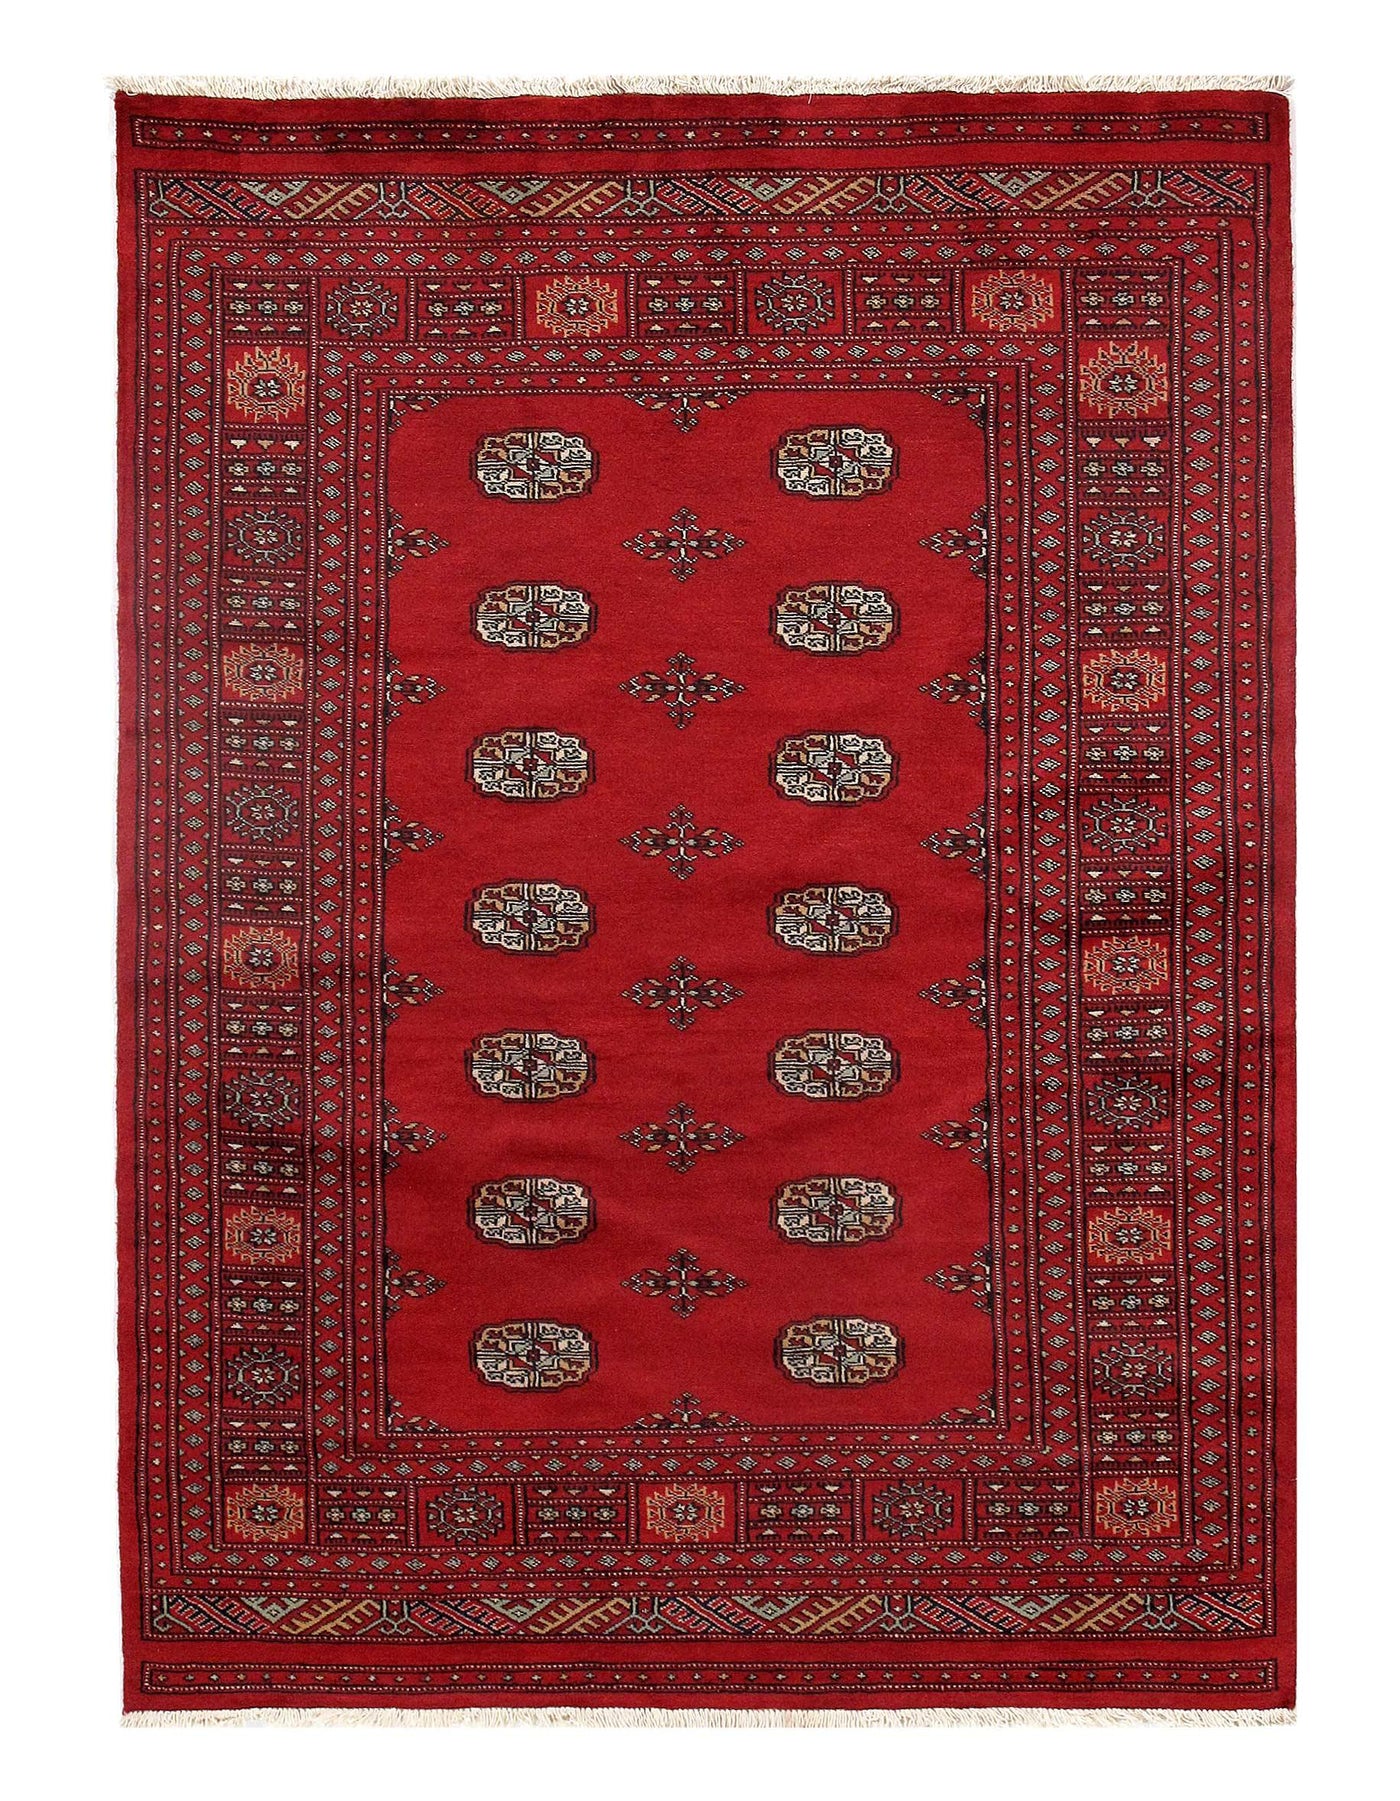 Fine Pak Bokhara Hand-Knotted Rug - 4'8" × 6'6"